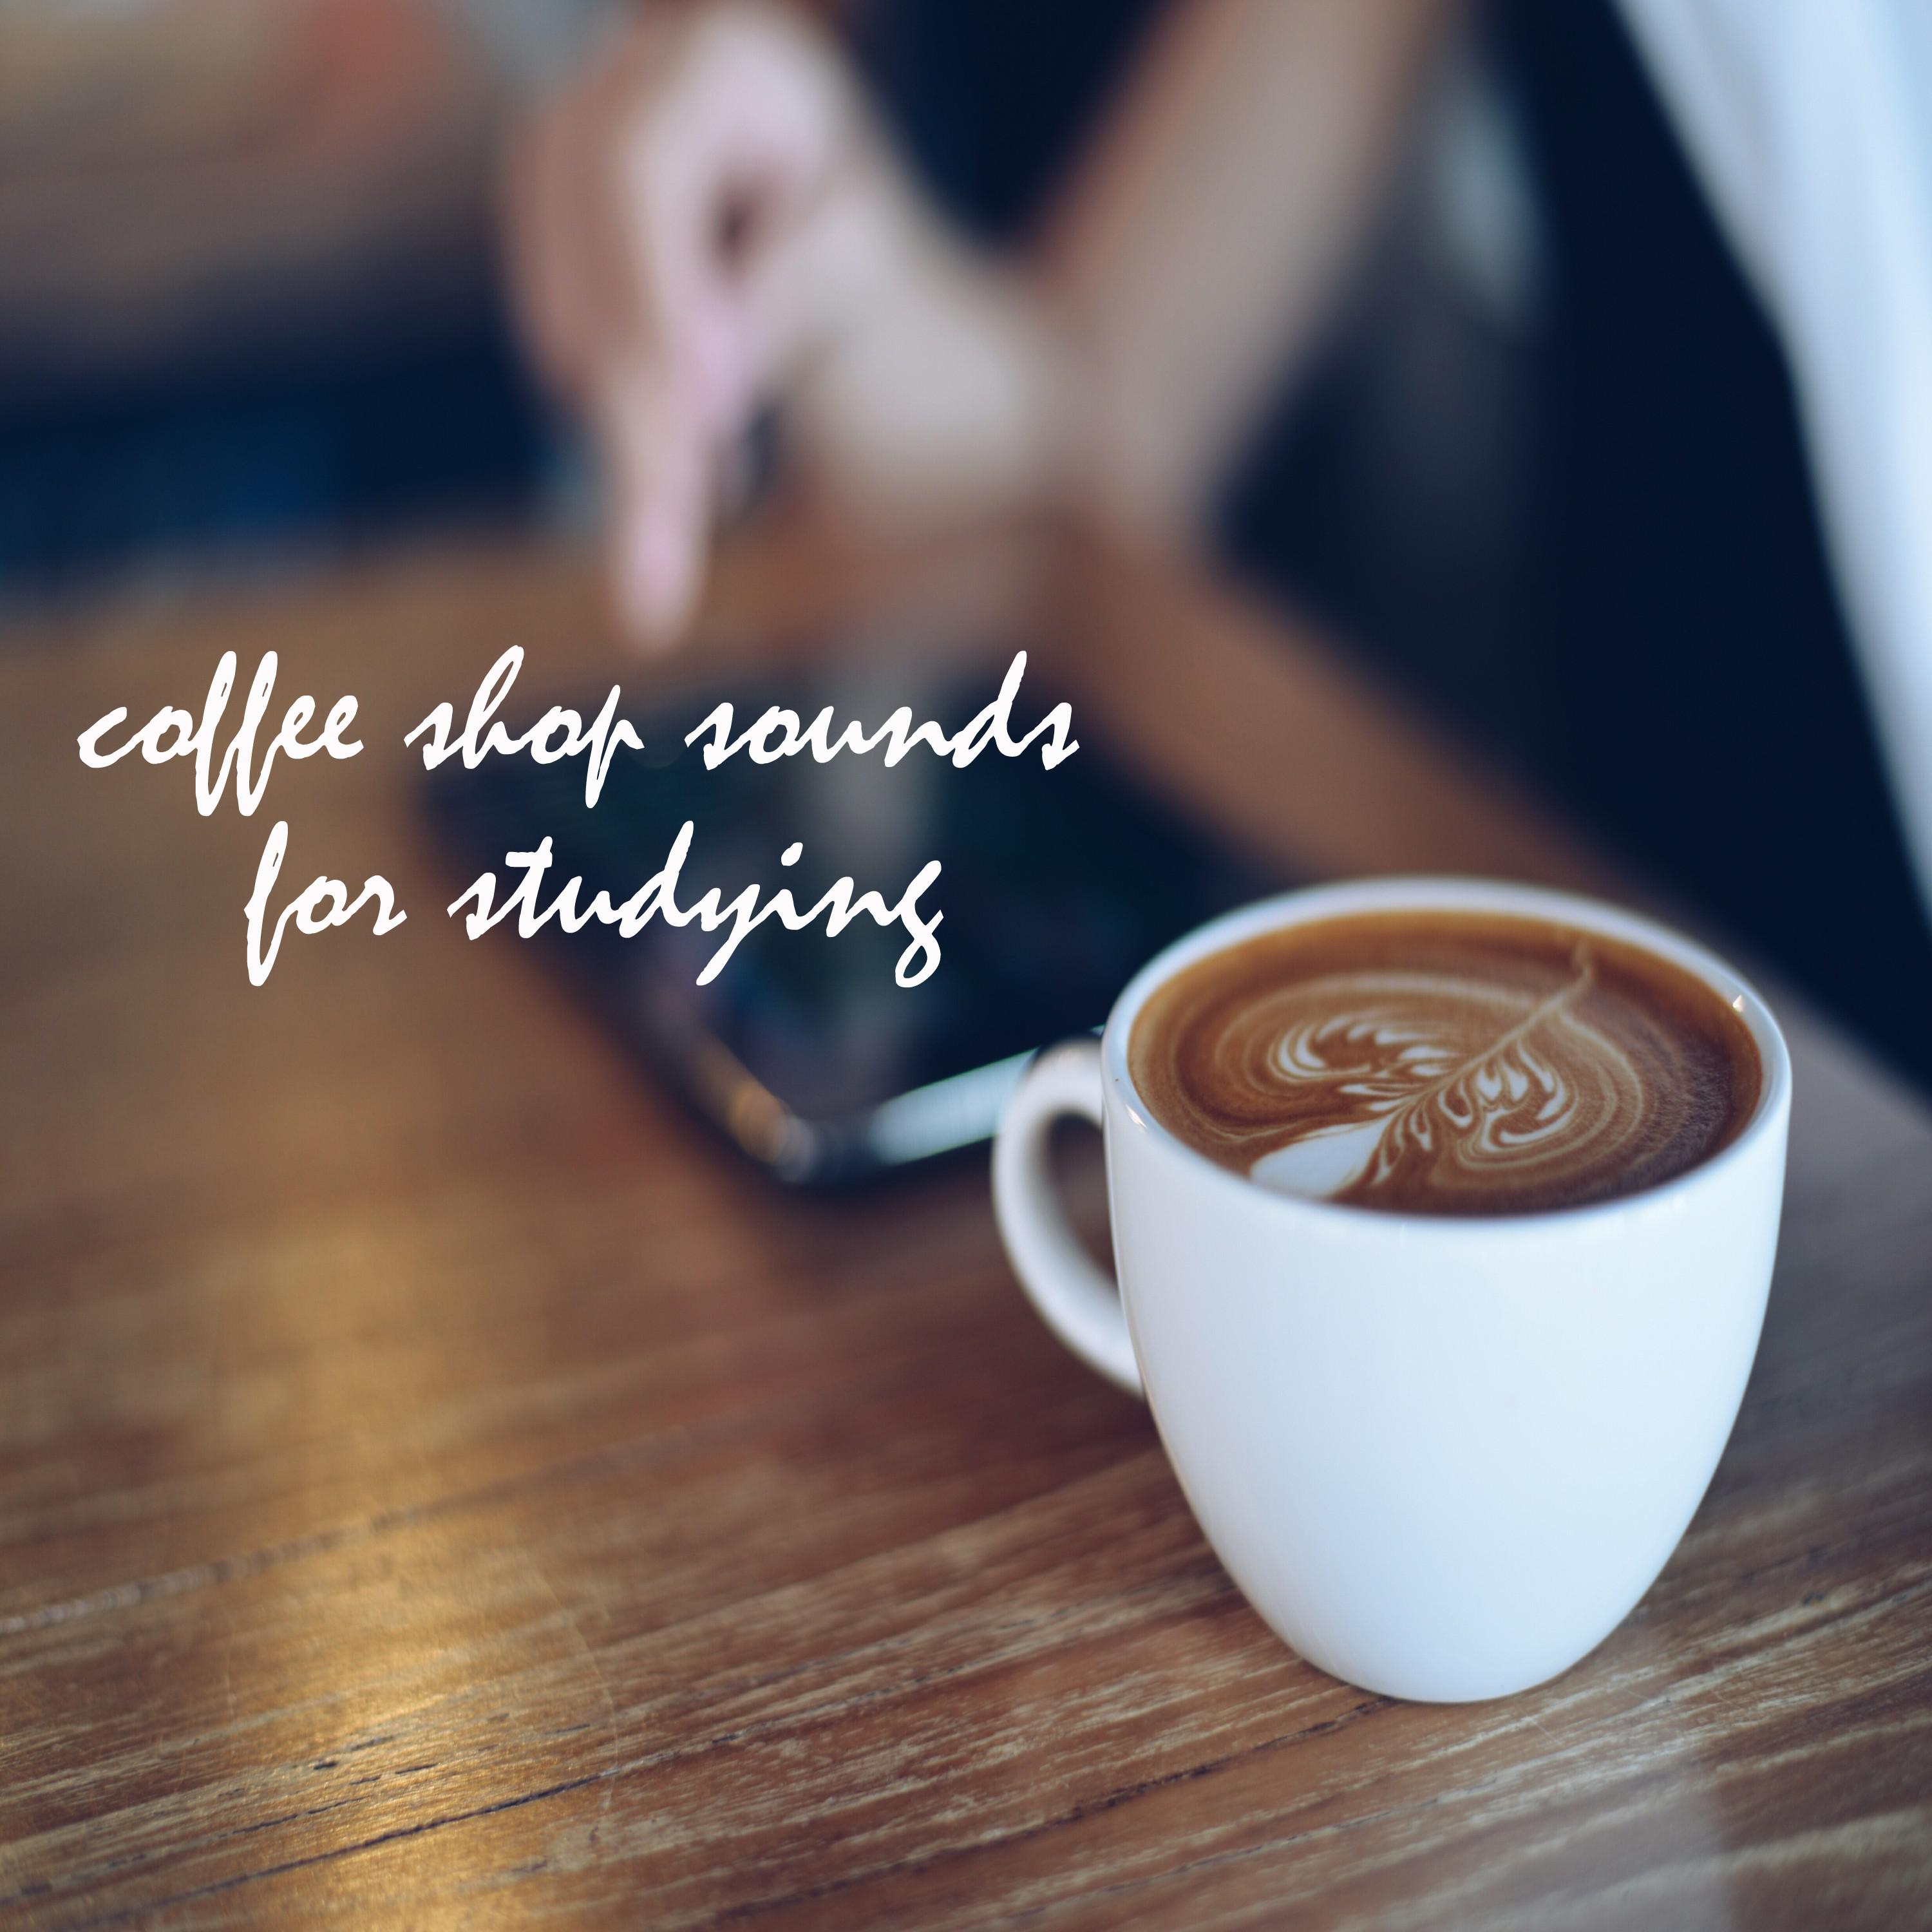 Coffee Shop Sounds for Studying and Working, Pt. 23